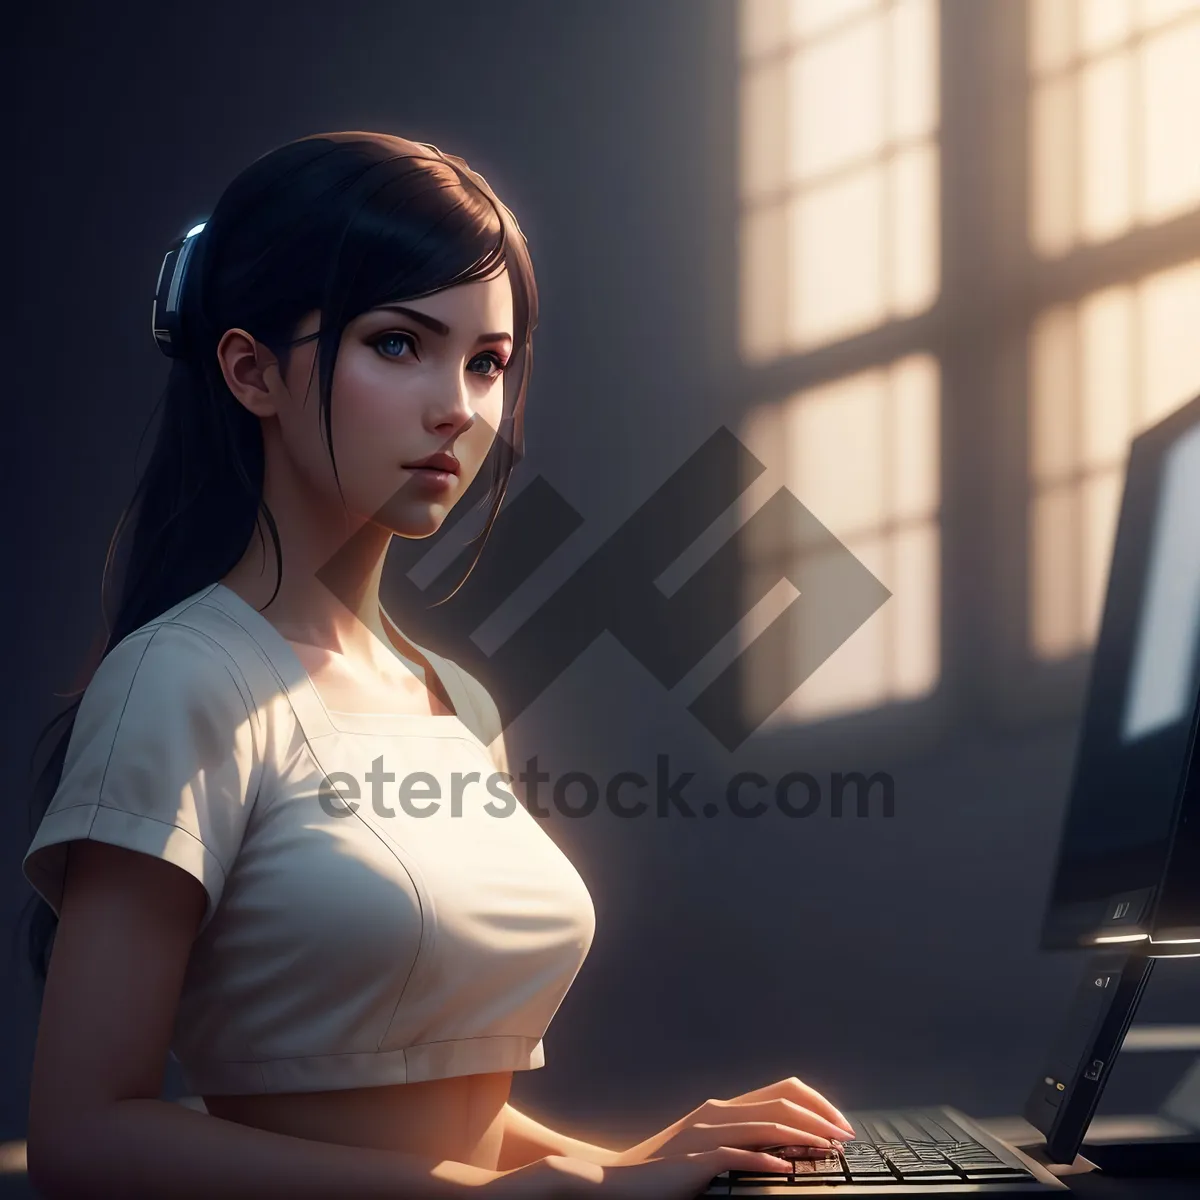 Picture of Smiling businesswoman working on laptop at office desk